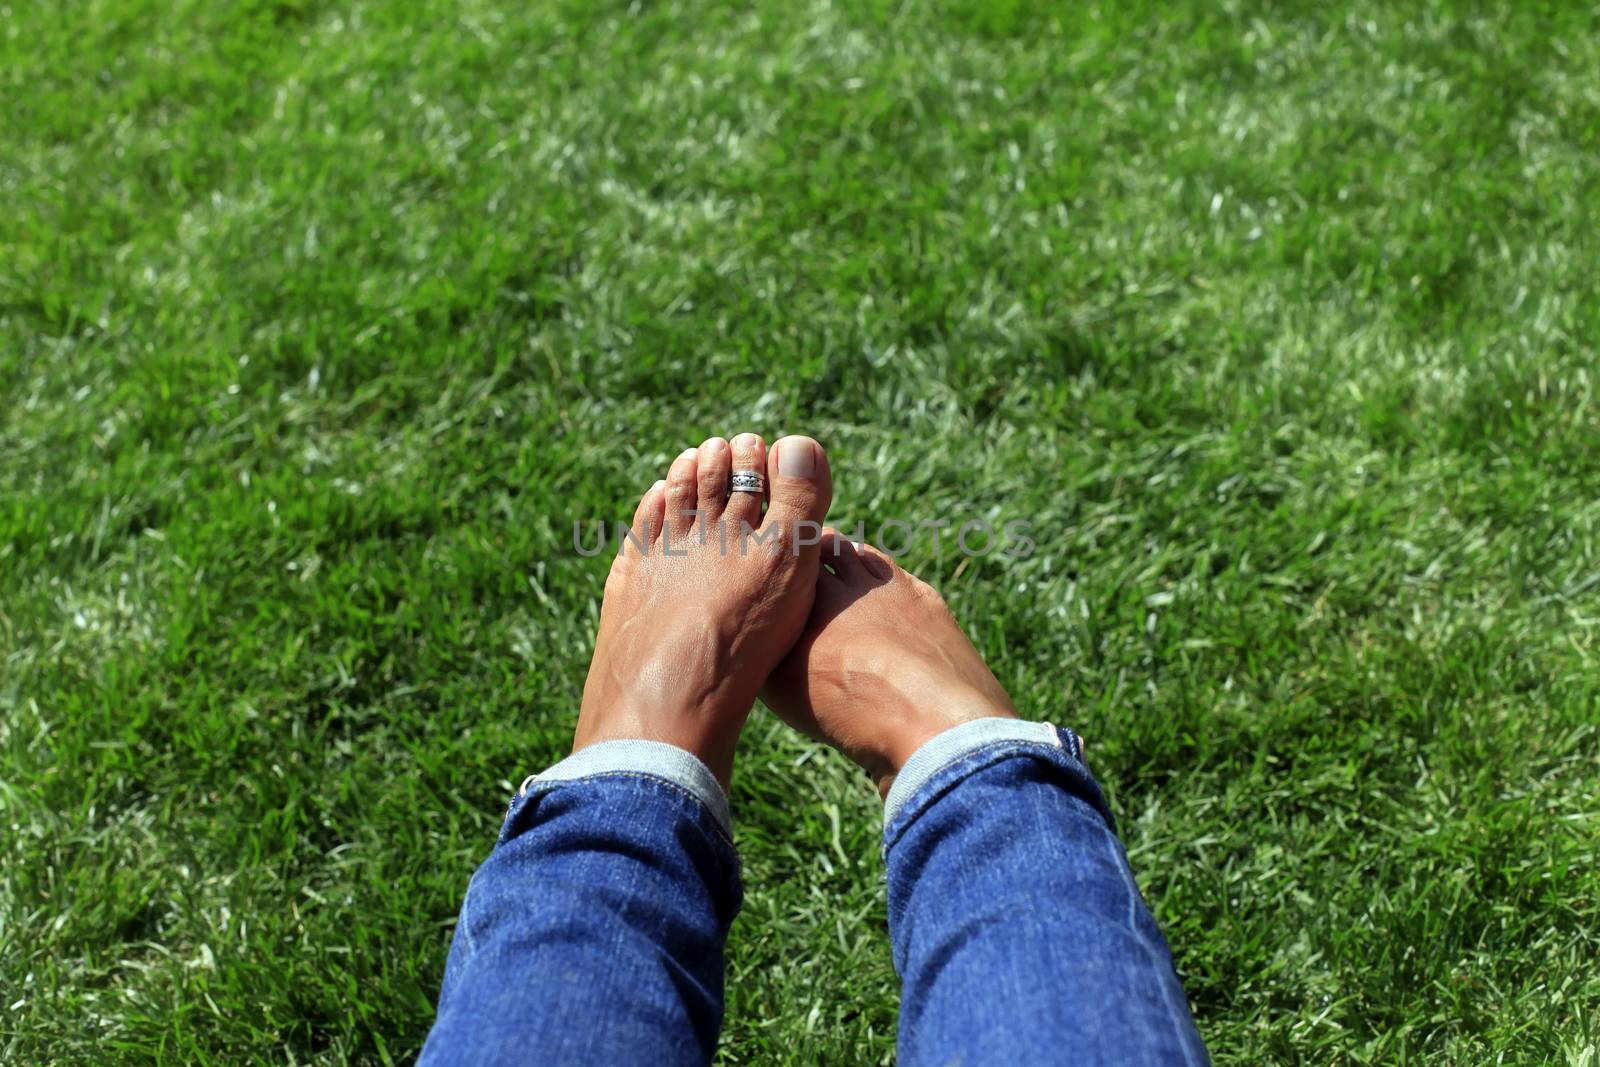 Bare feet in green grass, woman relaxing in nature by friday